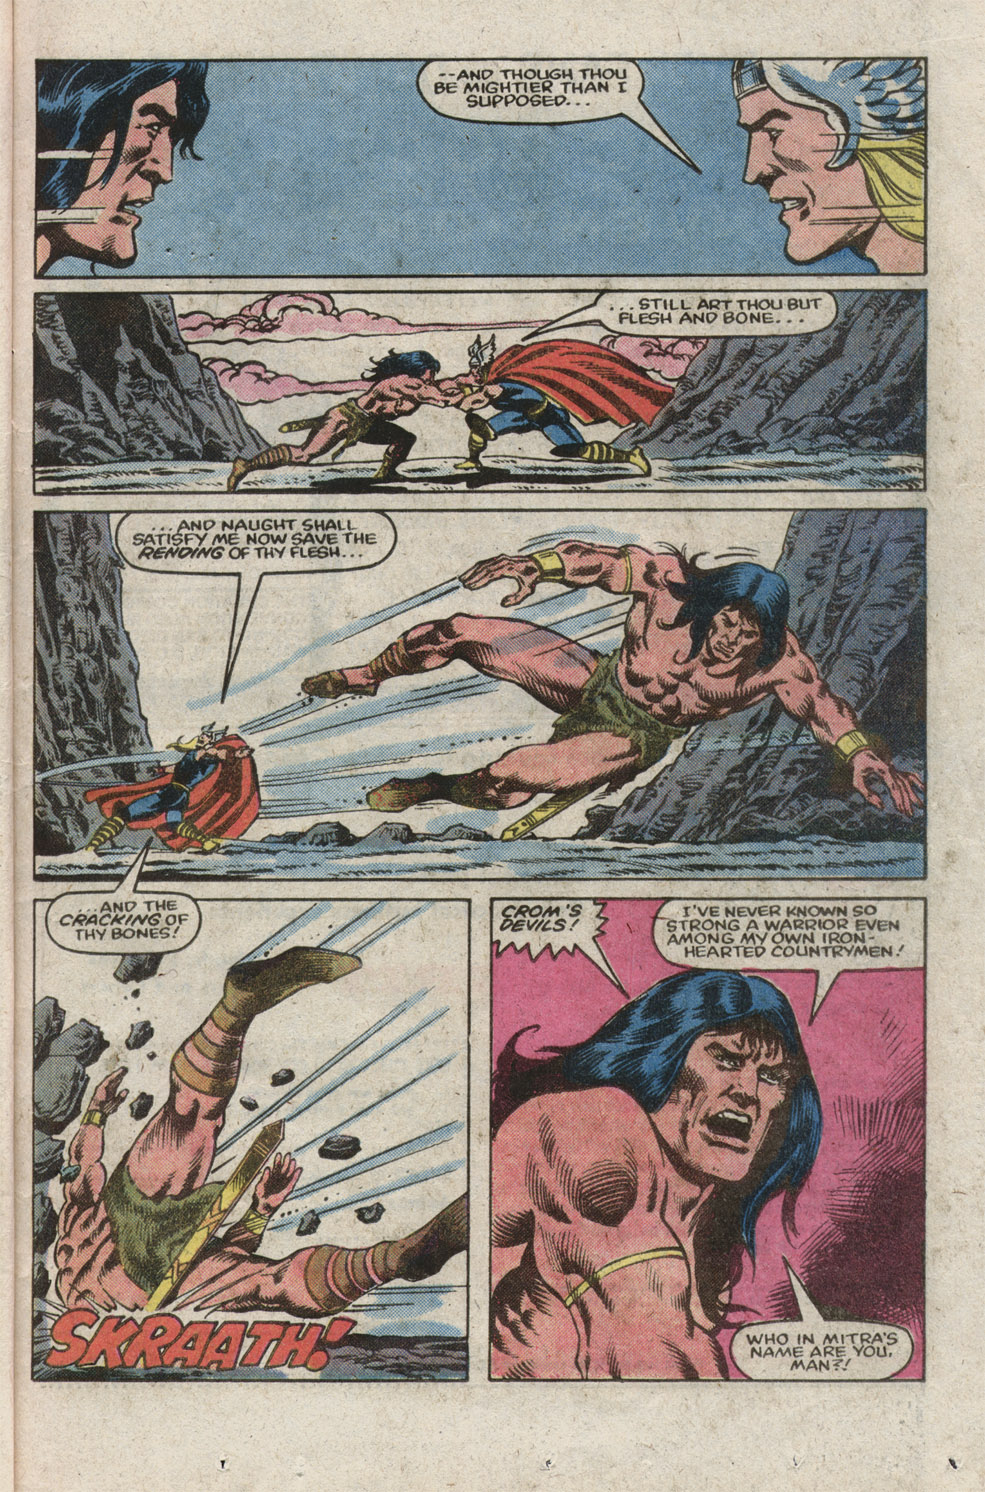 What If? (1977) issue 39 - Thor battled conan - Page 13